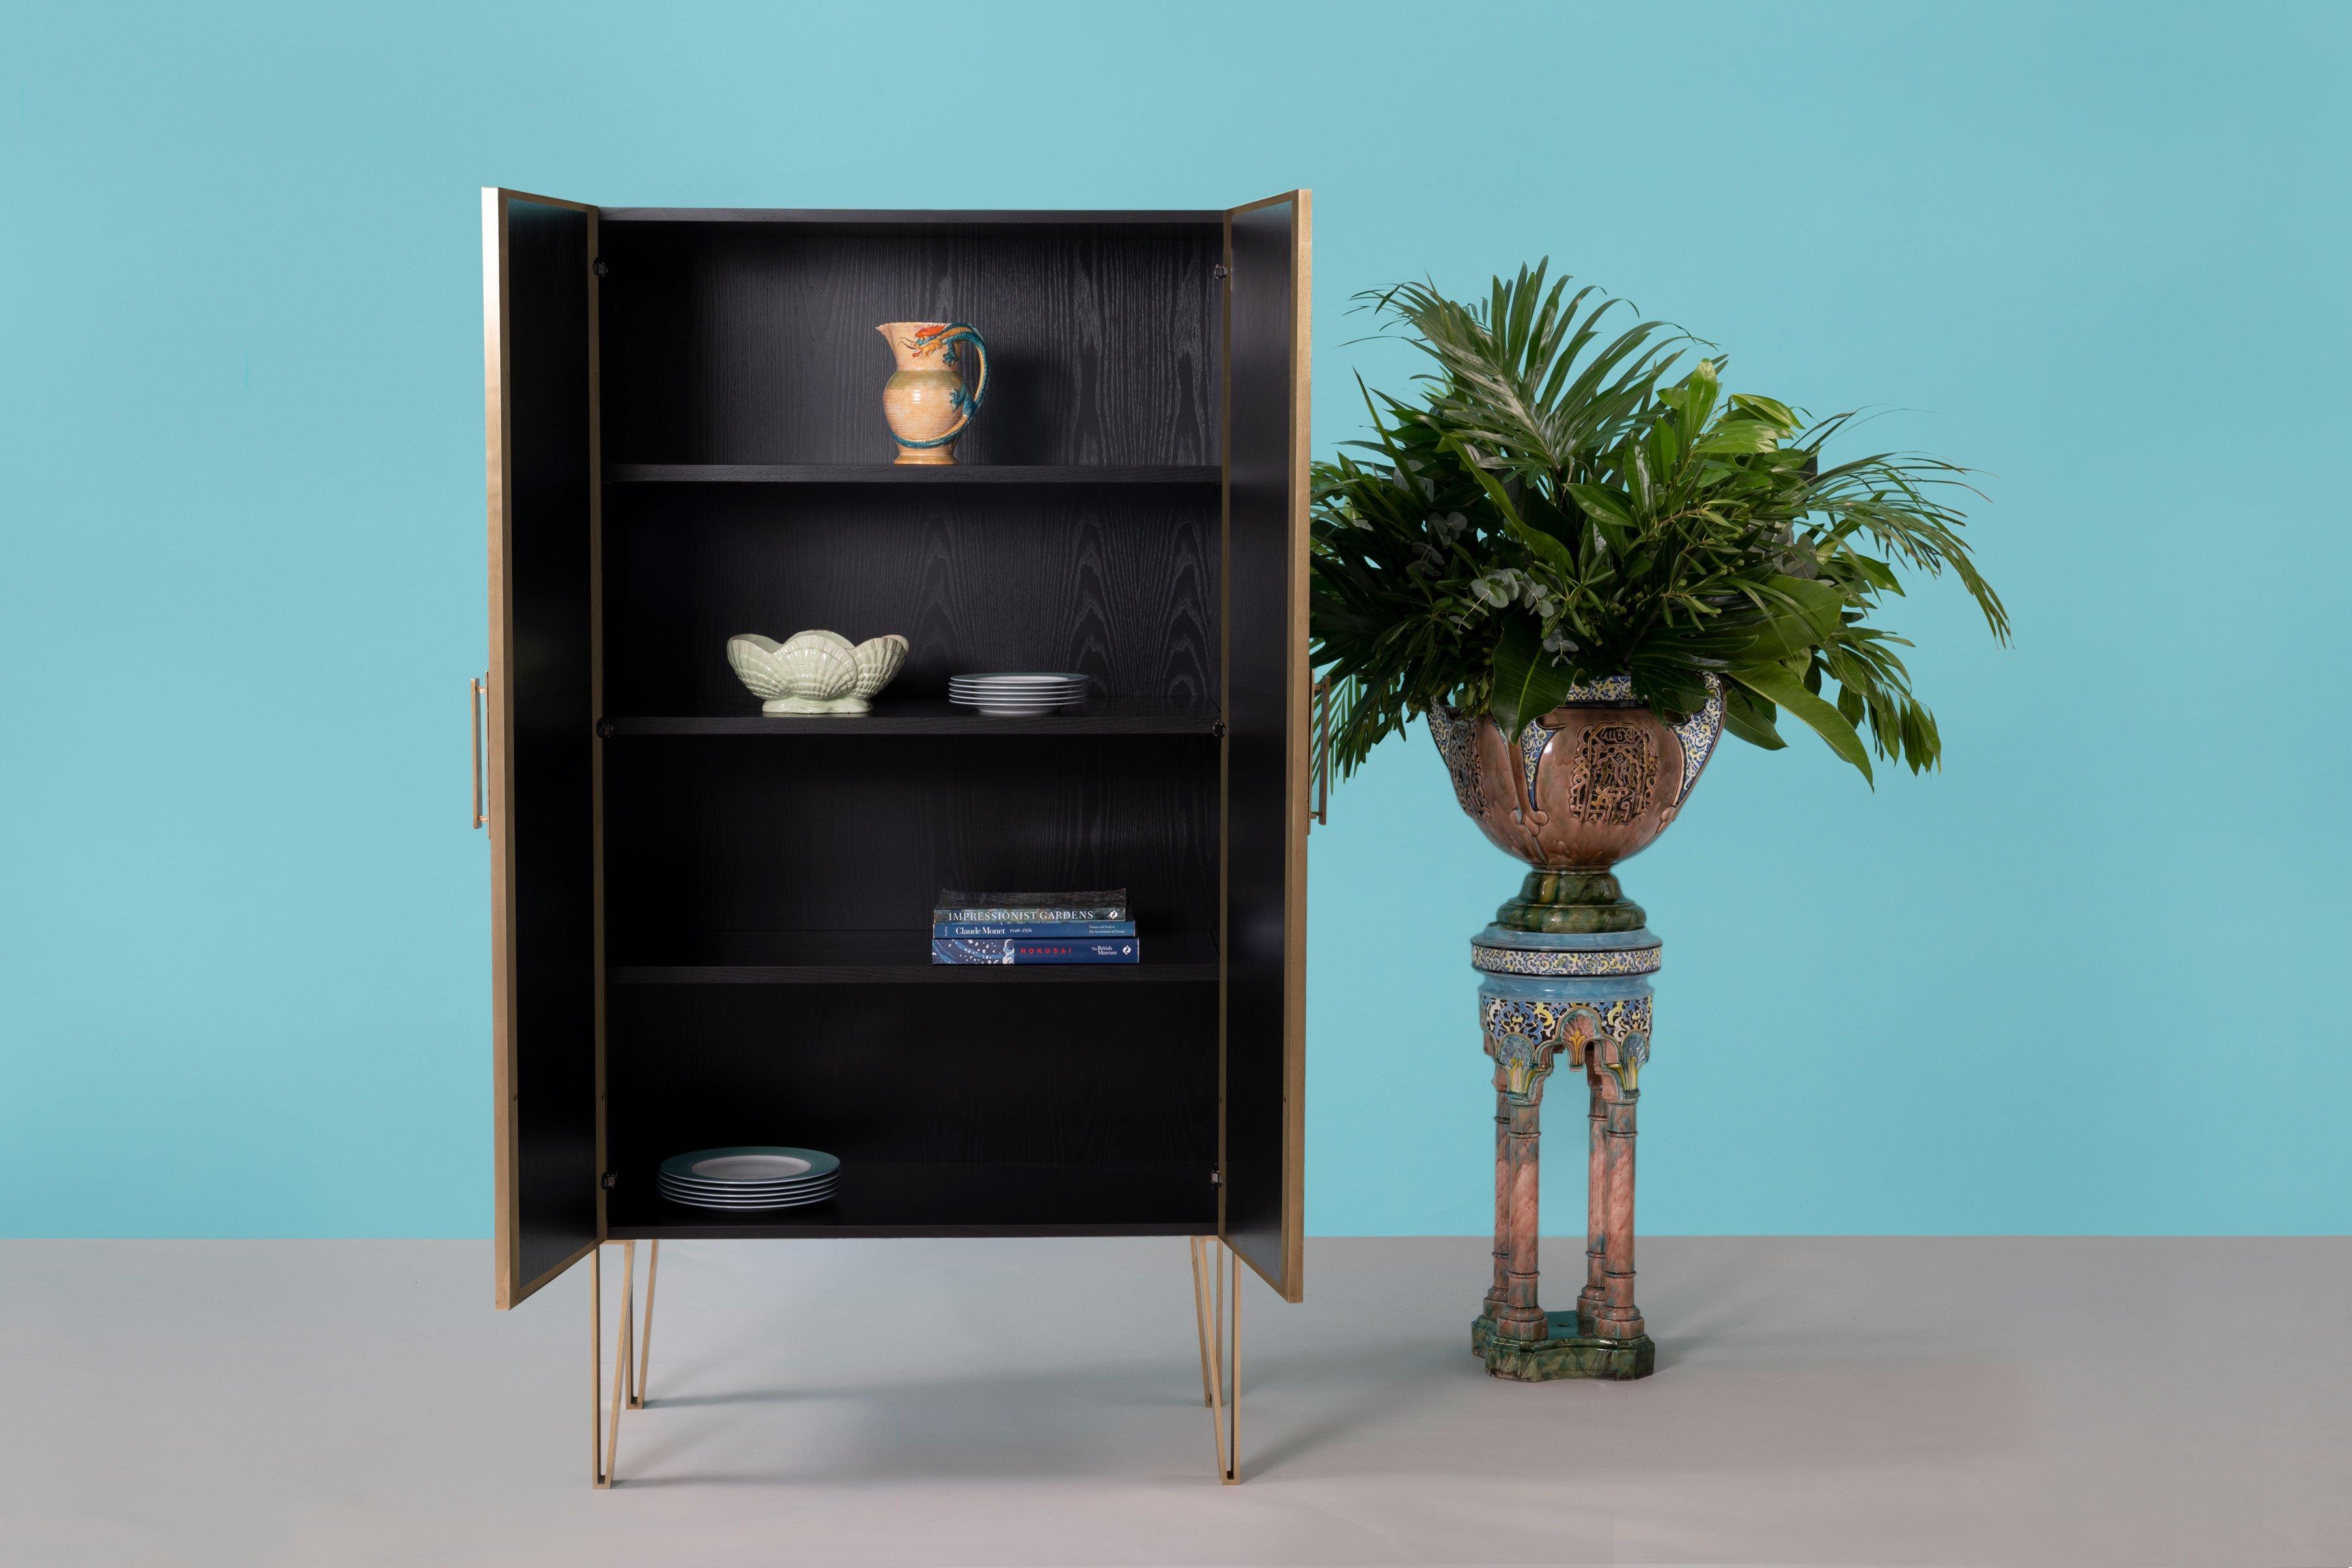 Fine Upholstered in FELDER FELDER’s stunning electric blue print, the Cordelia cabinet is a bold, confident choice for any interior.

Handcrafted in England from lacquered oak wood, this statement piece is upholstered in sumptuous silk-blend satin